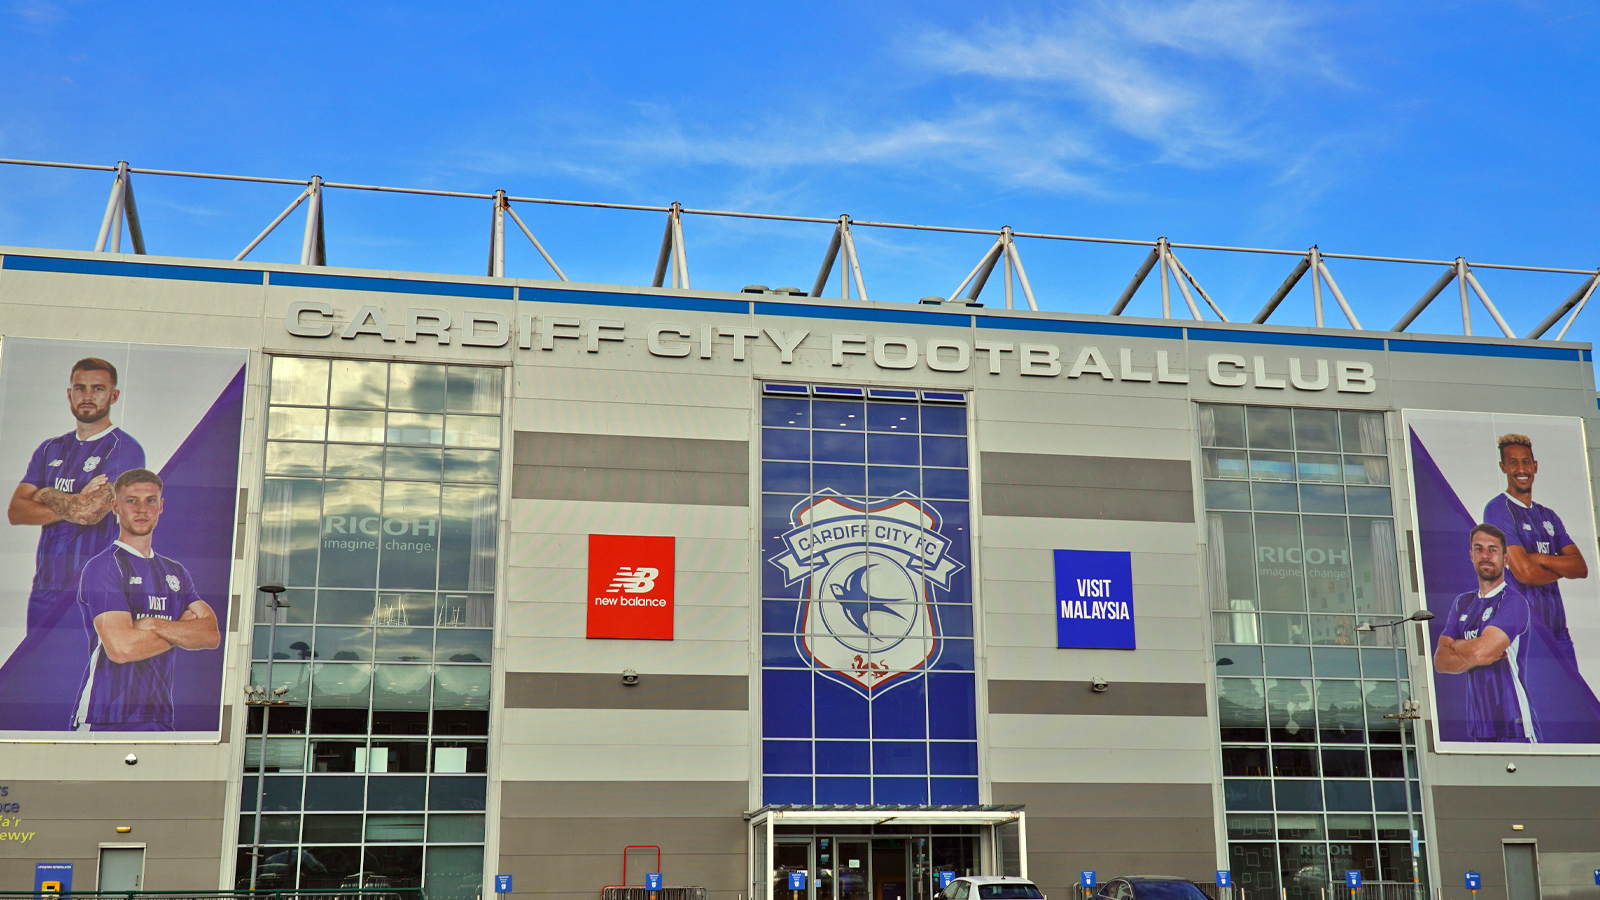 Cardiff City Academy on X: U21  We're delighted to announce that